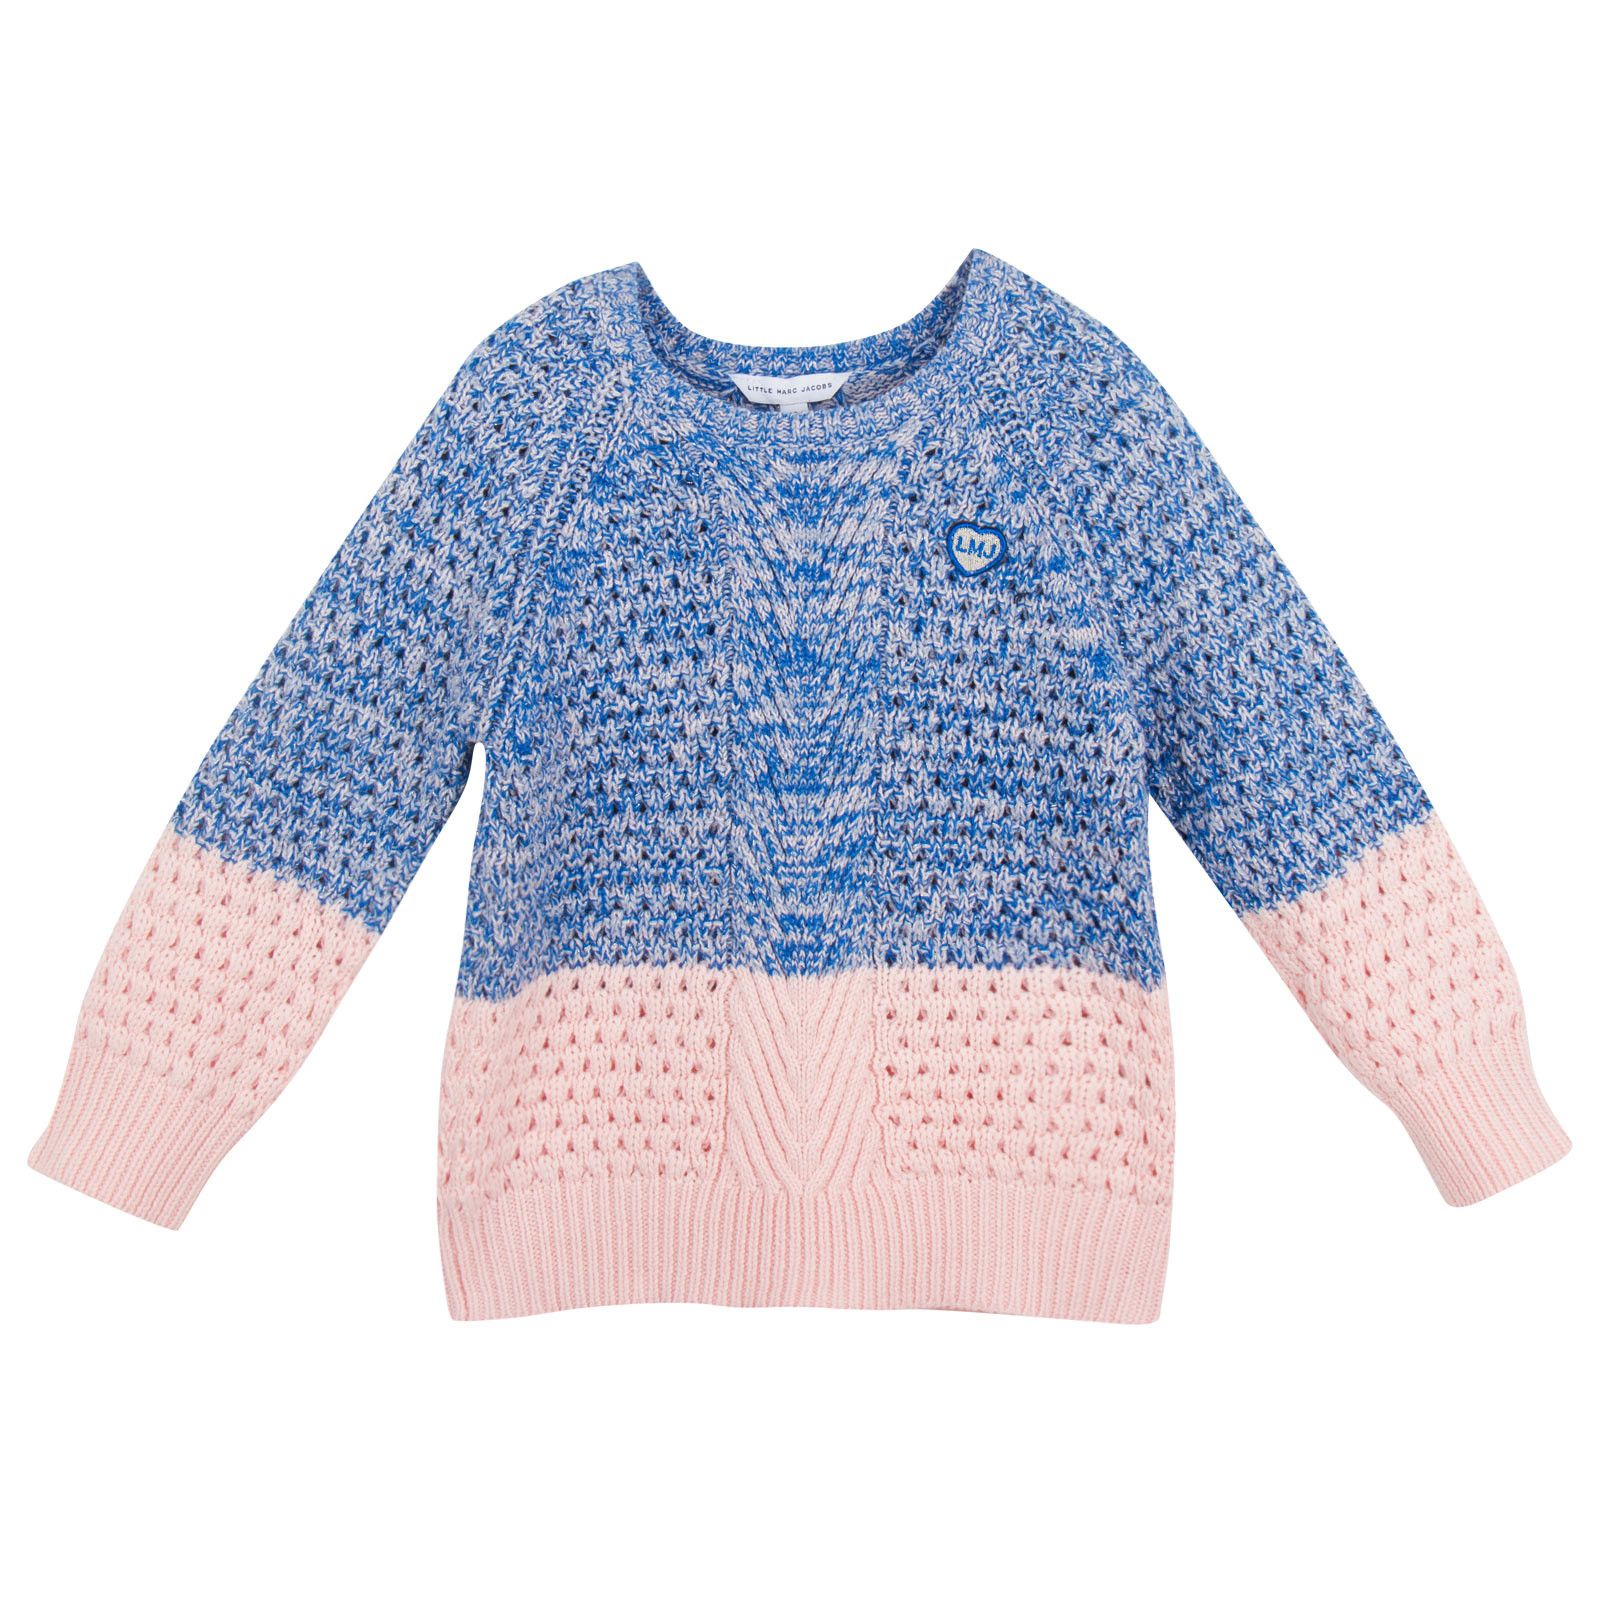 Girls Blue&Pink Two Tone Sweater With Embroidered Heart Logo - CÉMAROSE | Children's Fashion Store - 1